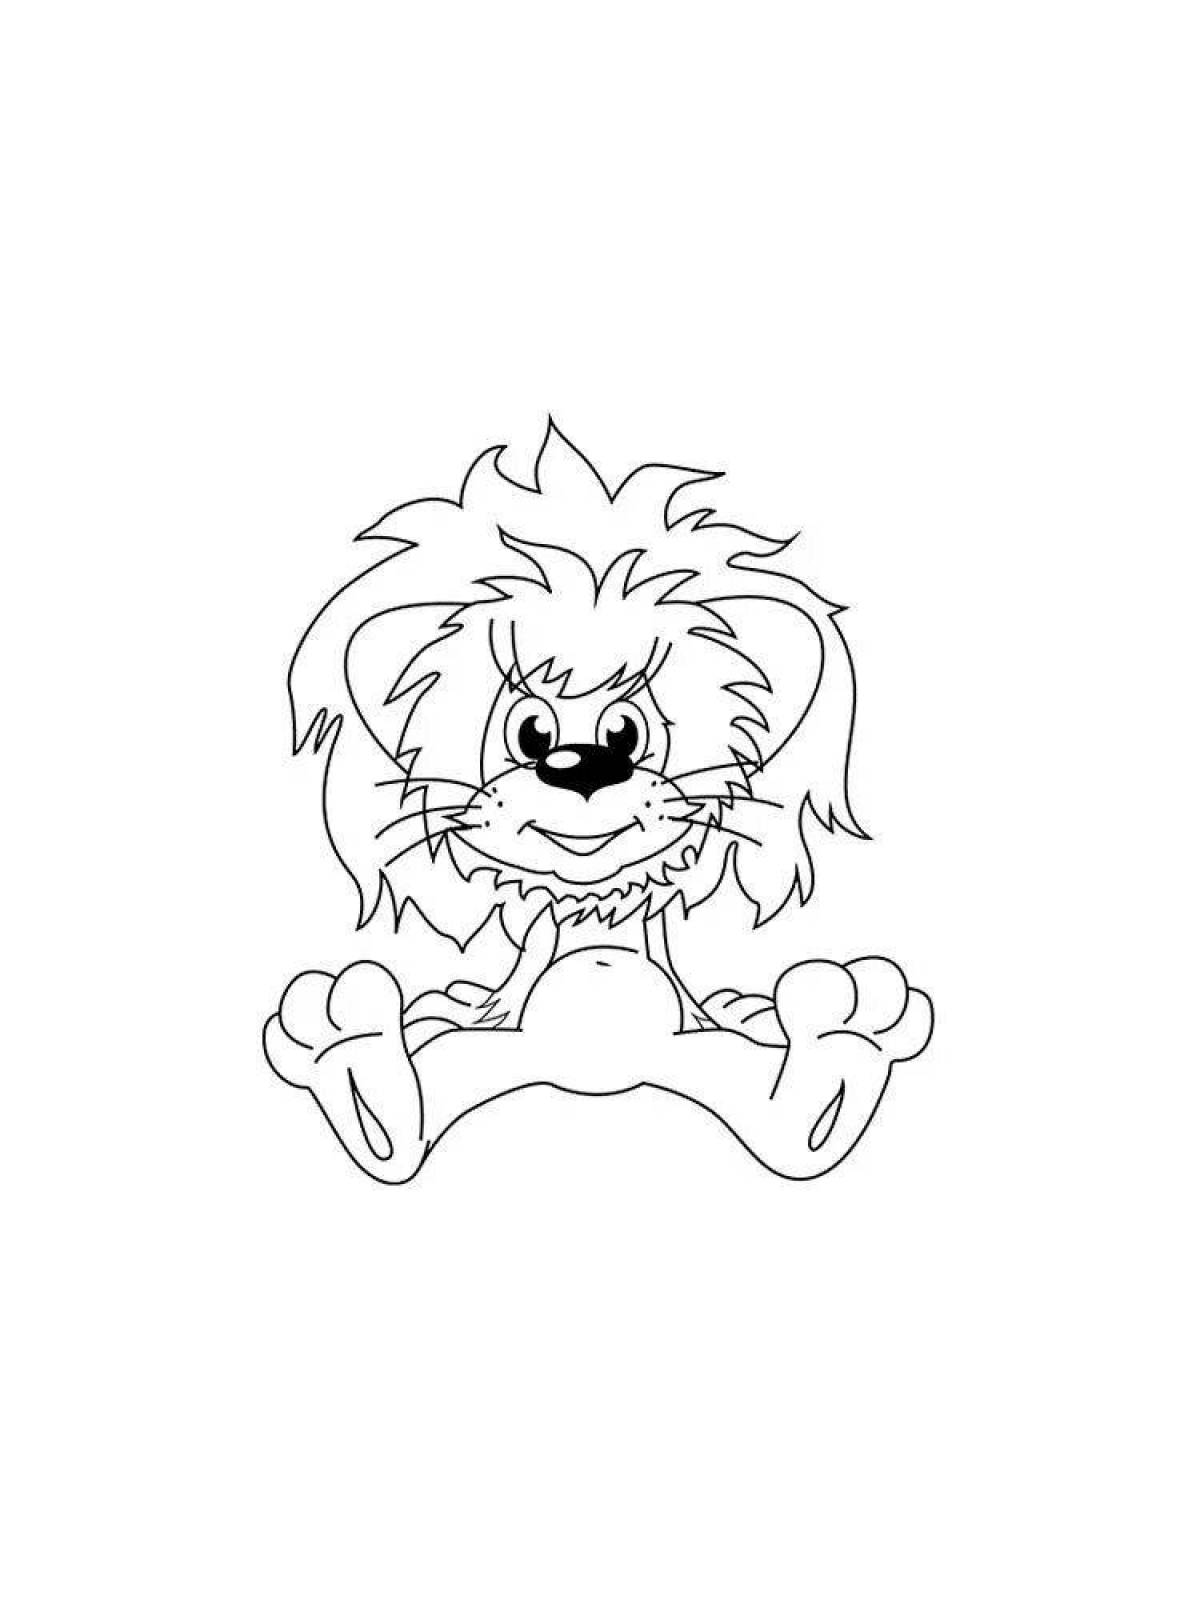 Coloring freaky lion cub